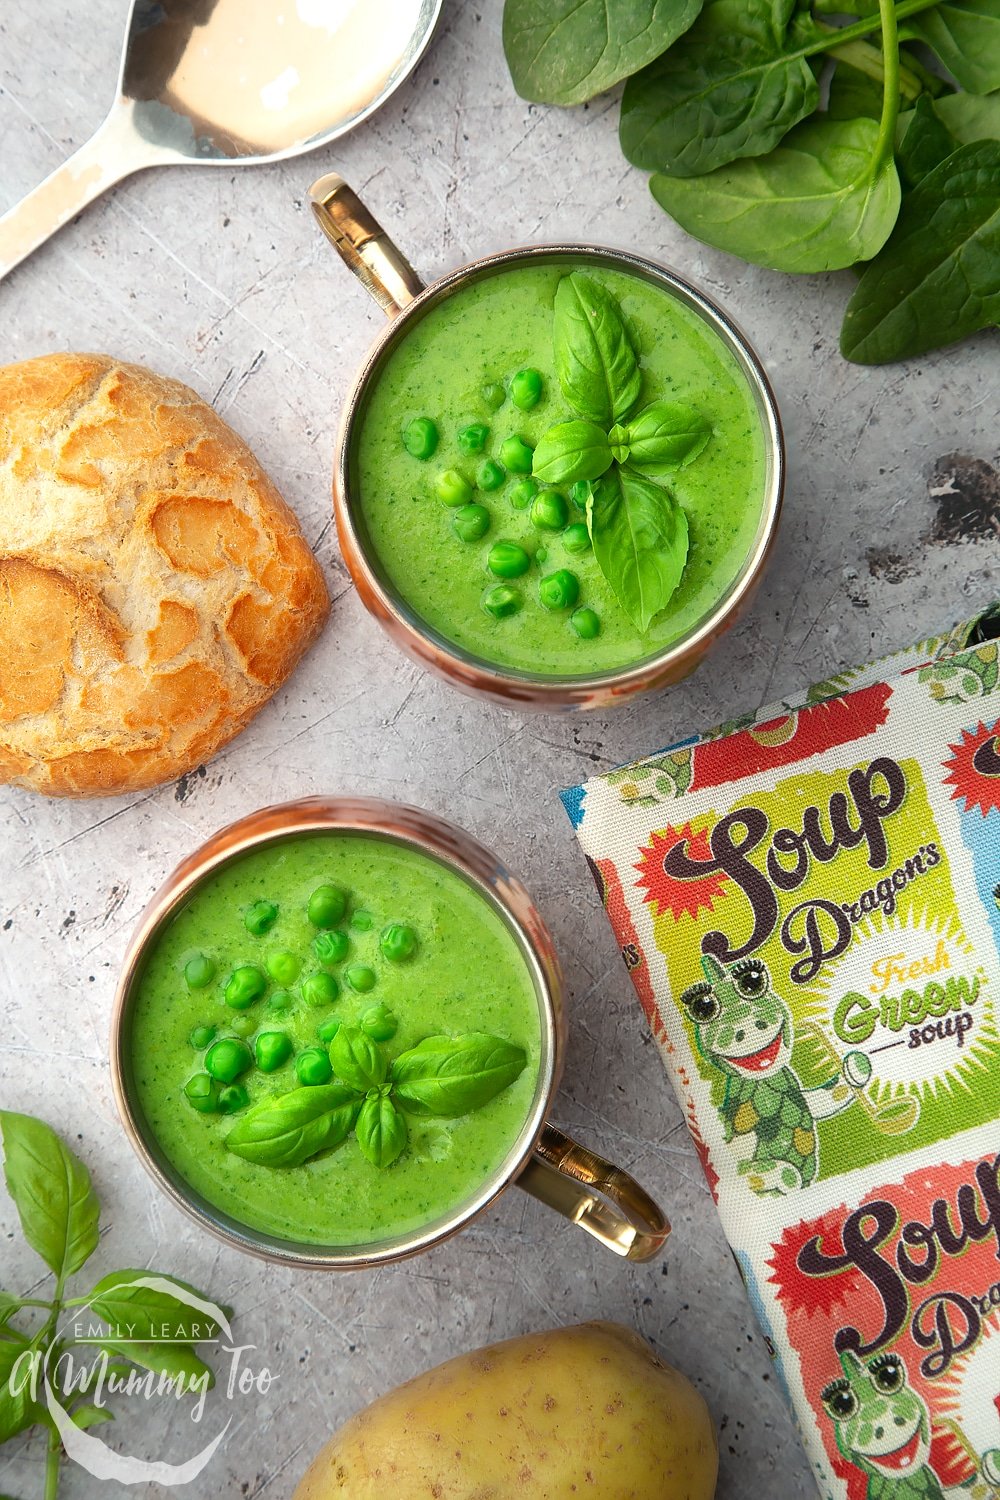 Wonderful fresh green soup, served with crusty bread